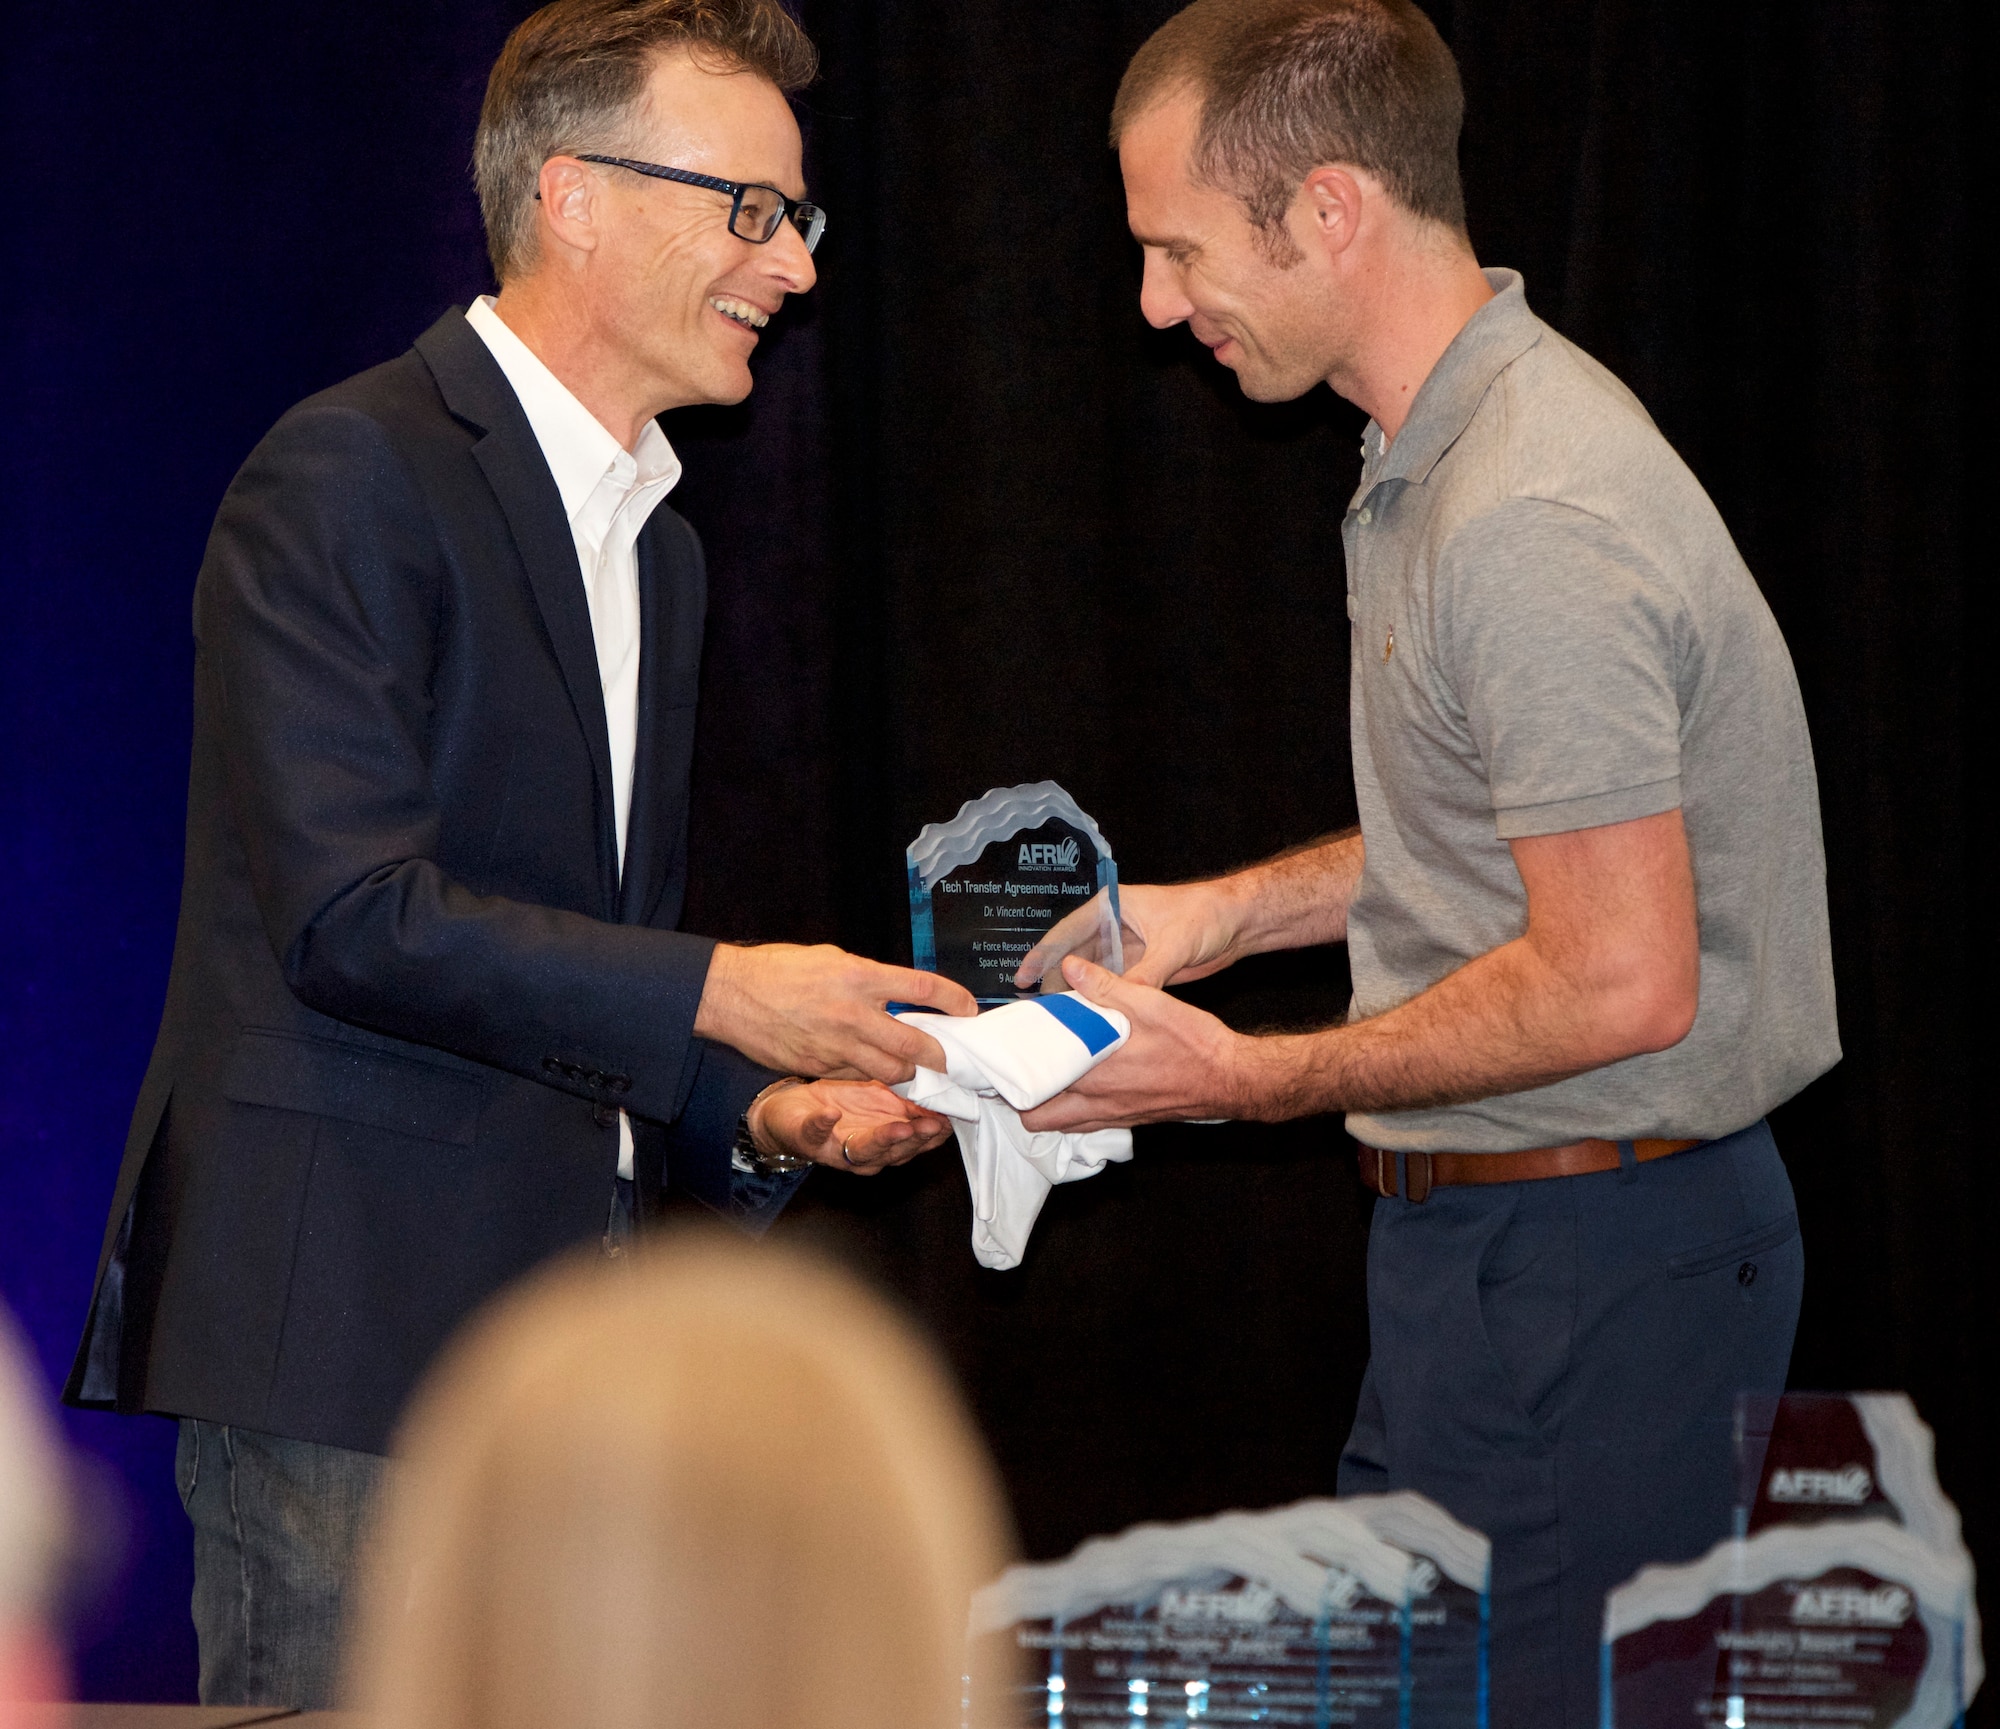 Matt Fetrow, Air Force Research Laboratory Tech Engagement Office director, presents AFRL scientist Dr. Vince Cowan the Tech Transfer Agreement Award at AFRL New Mexico’s 2019 Innovation Awards event held on Aug. 9 in Albuquerque, N.M.